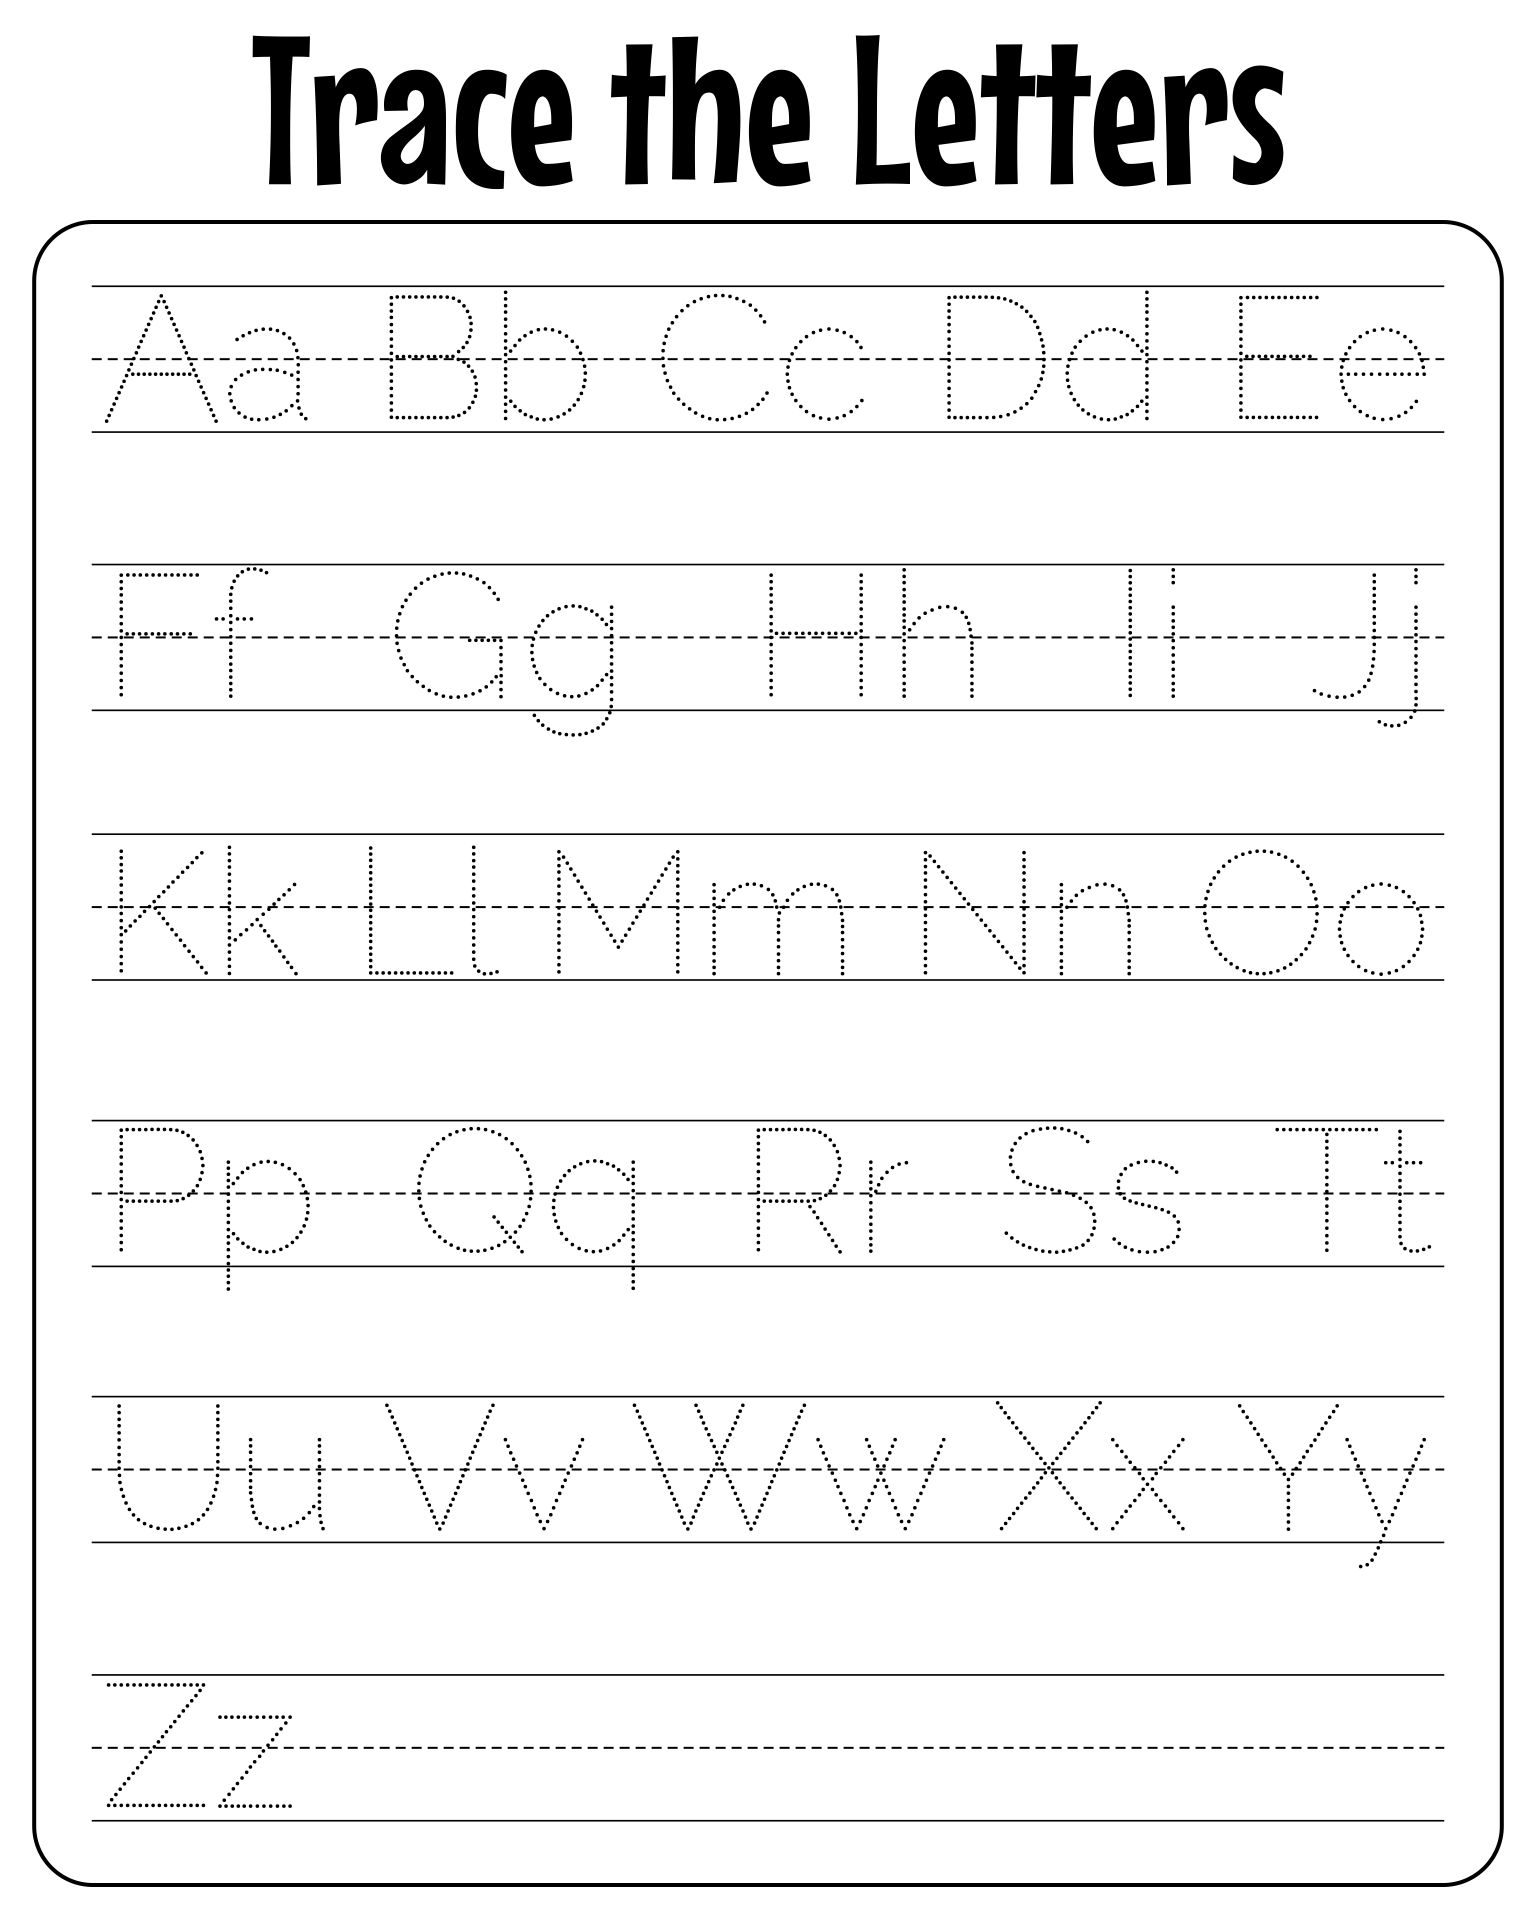 traceable-letters-printable